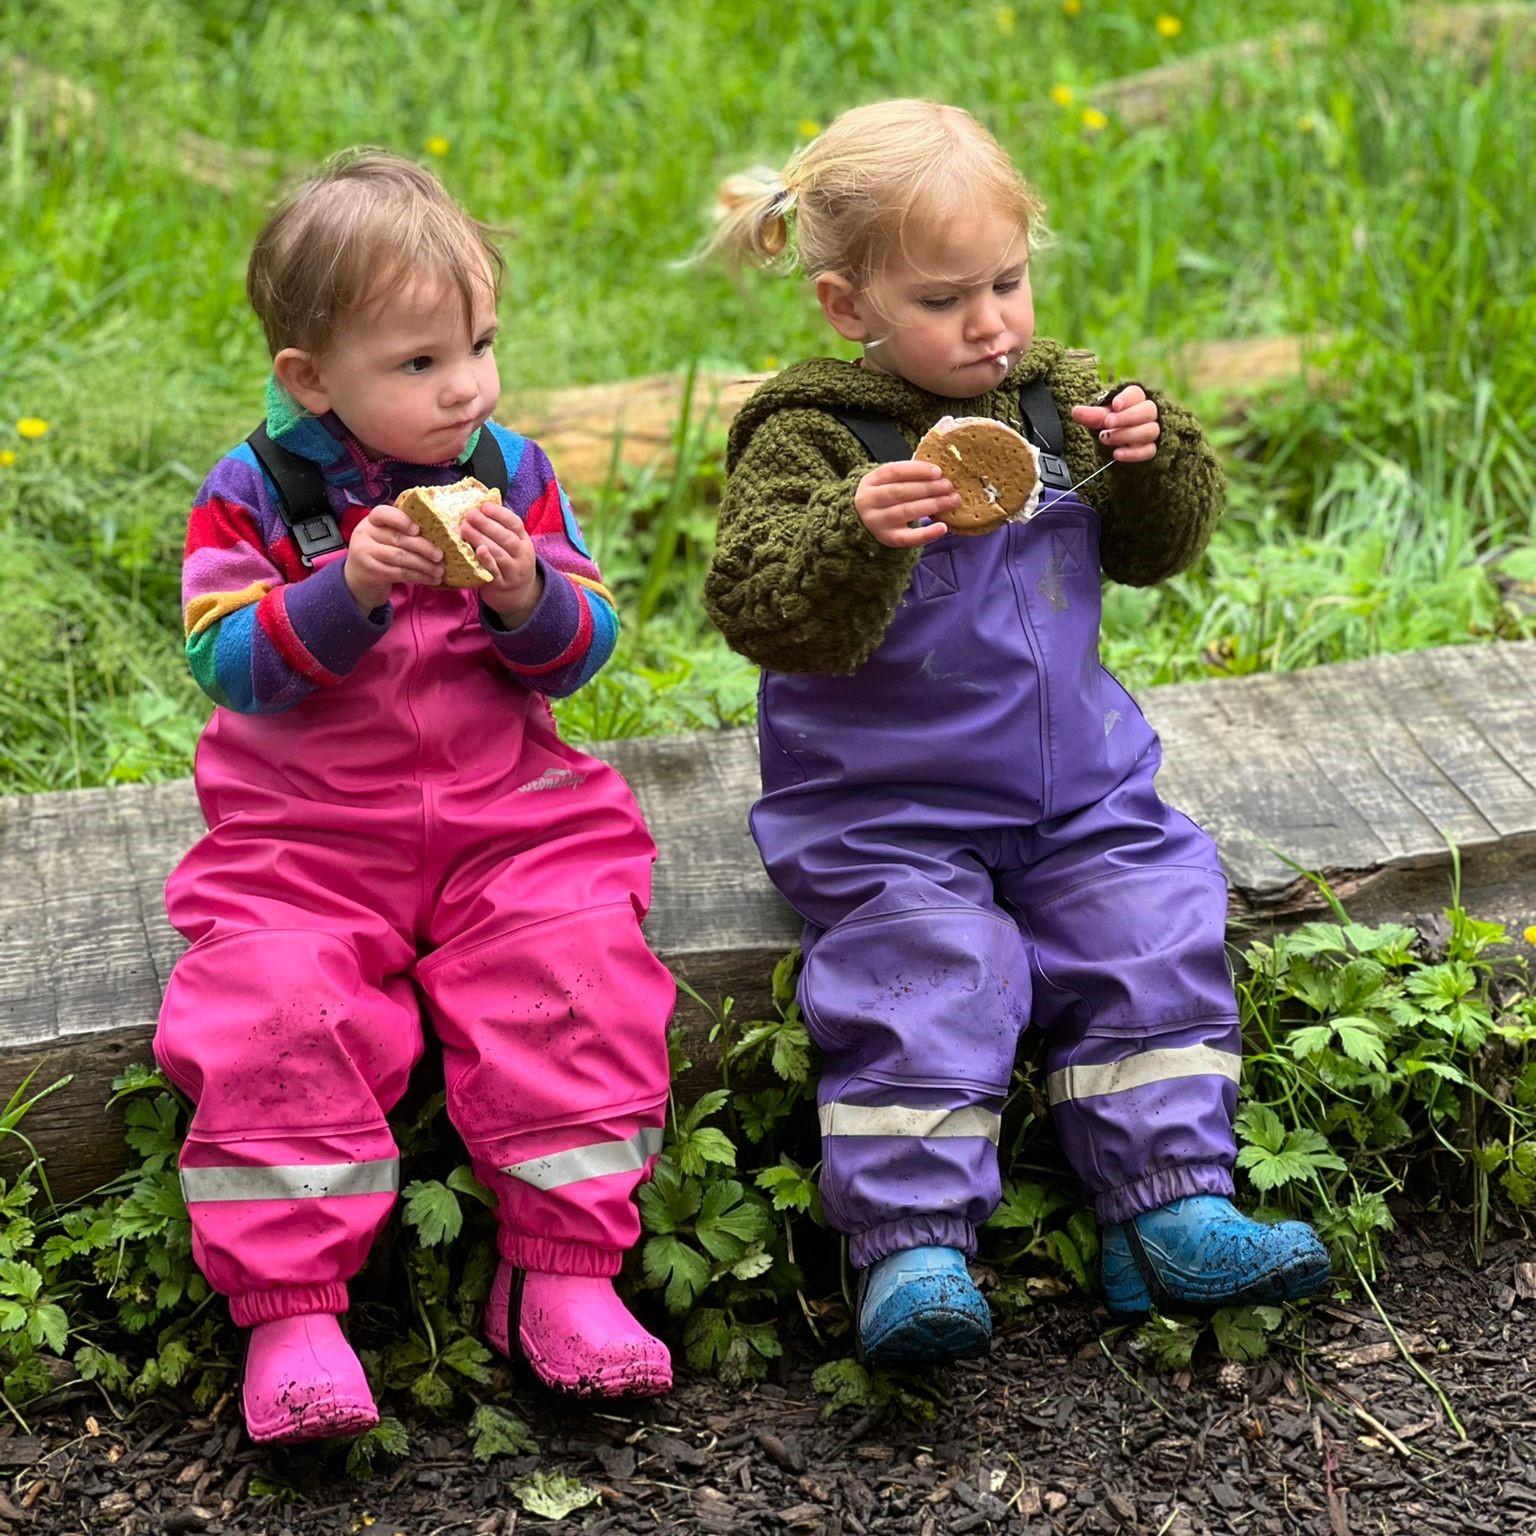 Official Forest School Kit List – Recommended Clothing